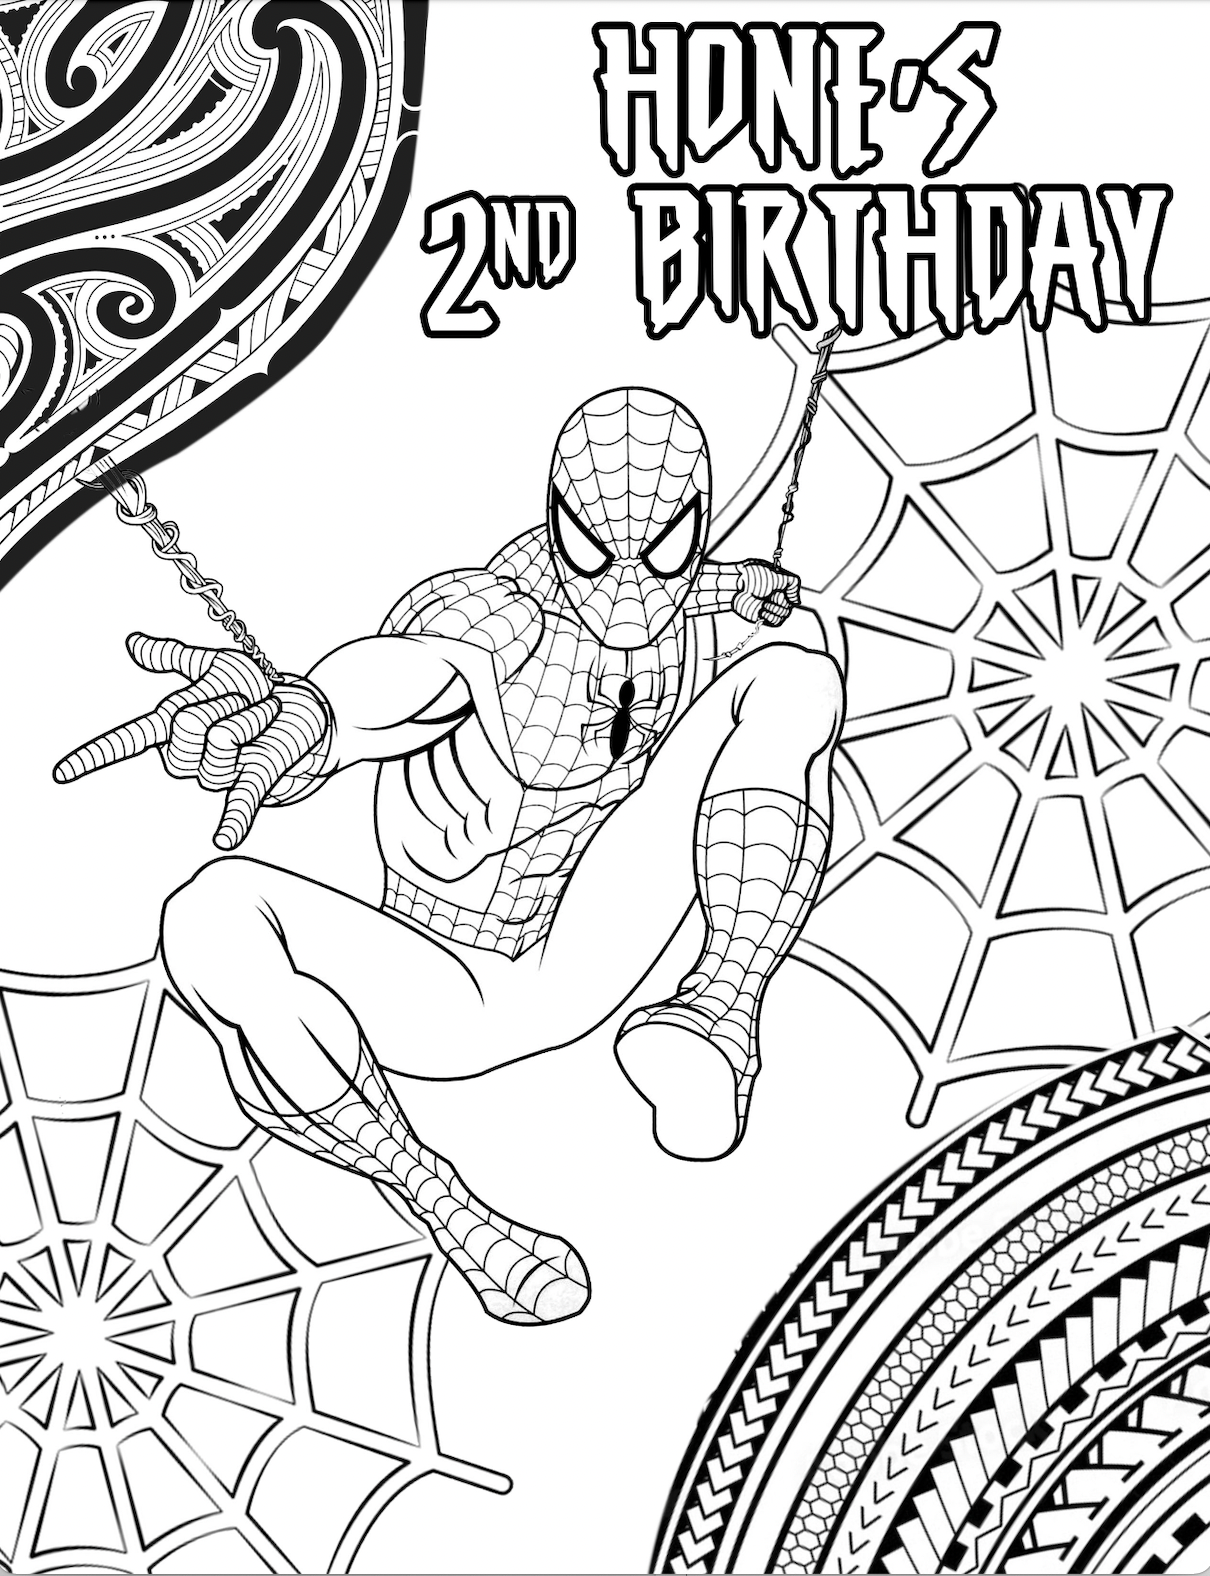 Spiderman themed colouring page